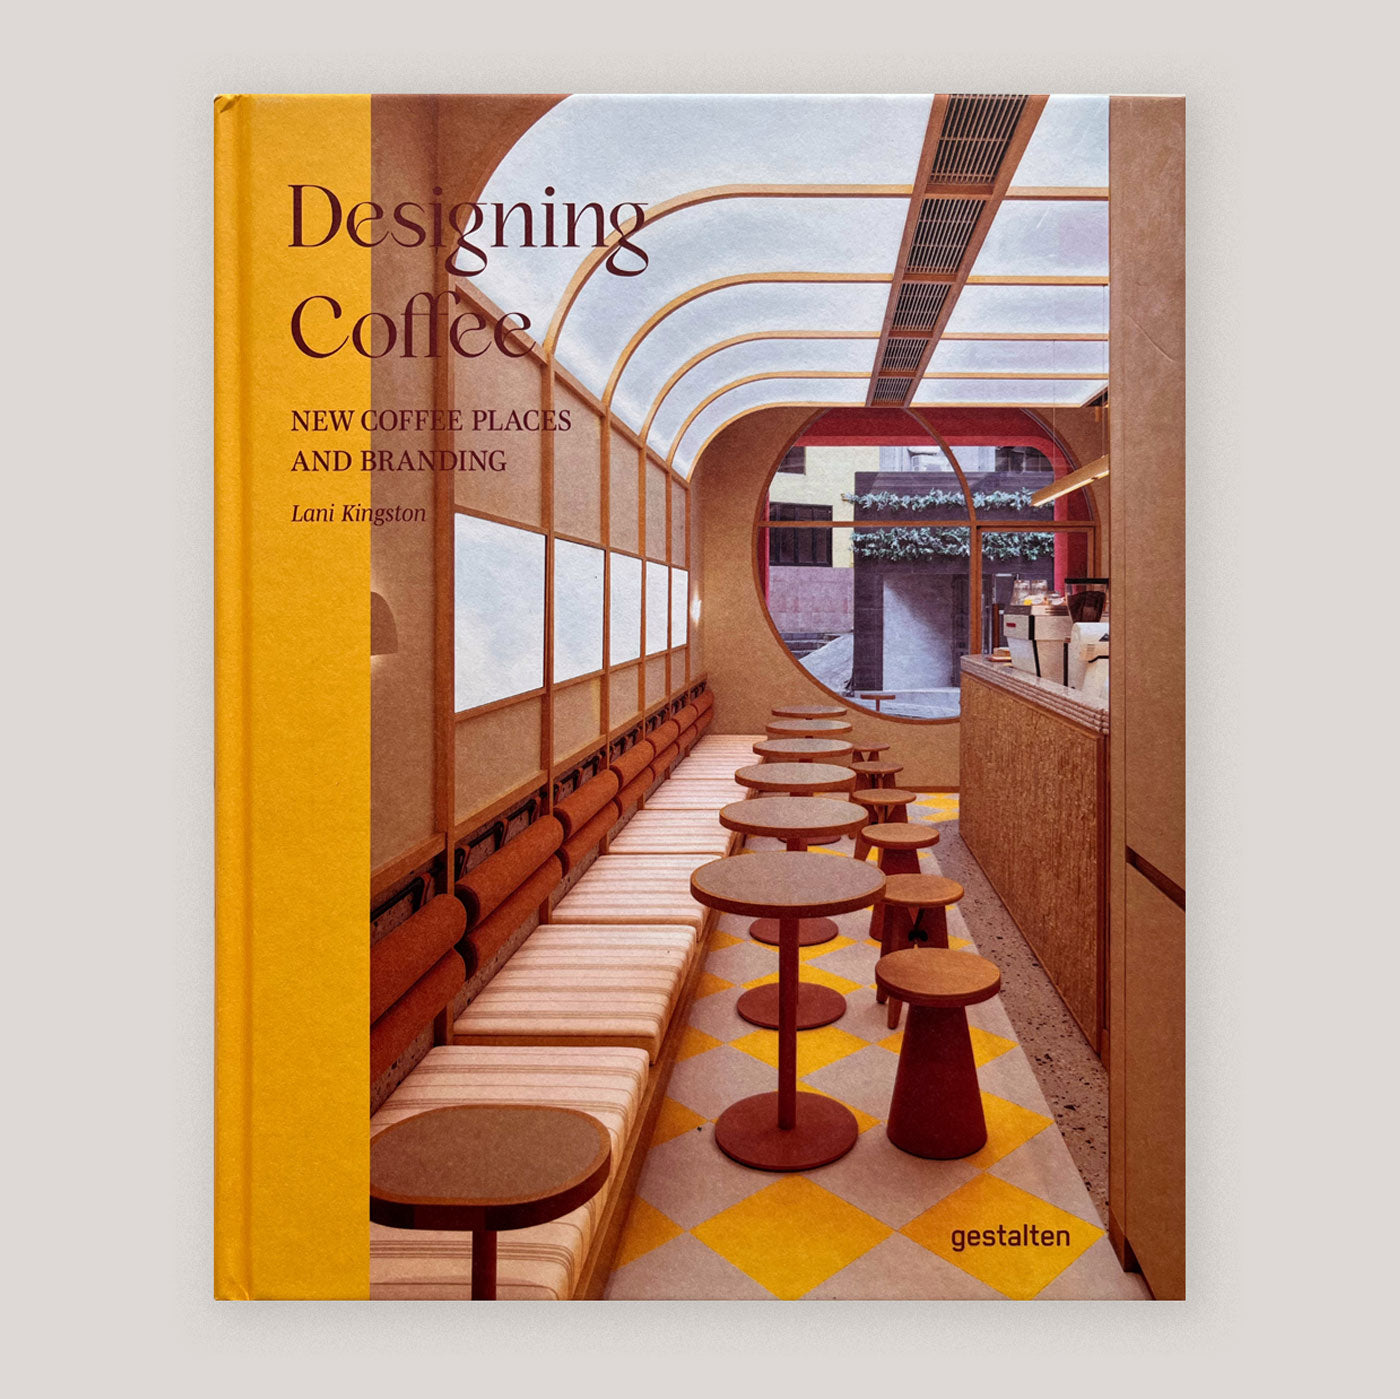 Designing Coffee: New Coffee Places and Branding | Lani Kingston | Colours May Vary 